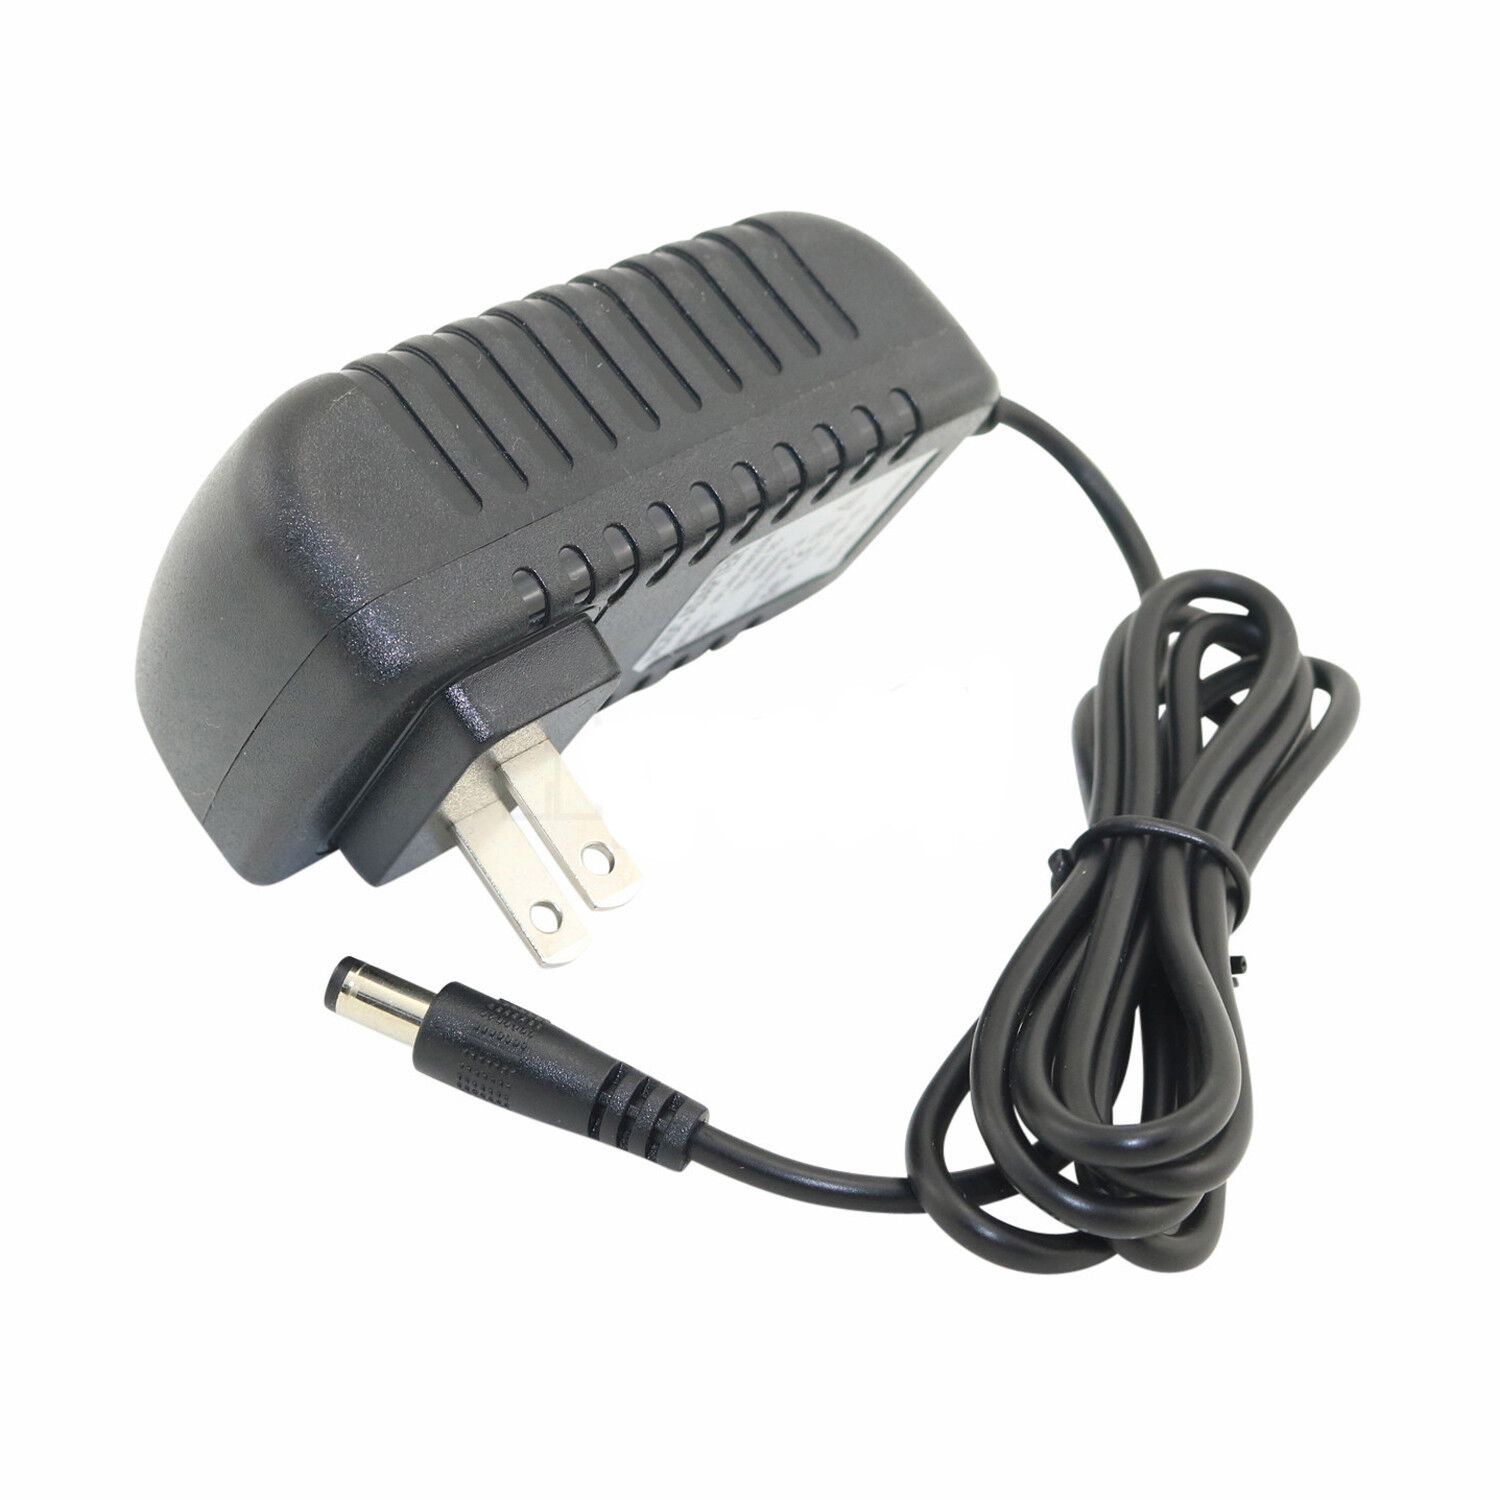 *Brand NEW*25.2V 0.6A 2500mAh AC Adapter Charger Power Cord For Fusion Muscle Massage Gun - Click Image to Close